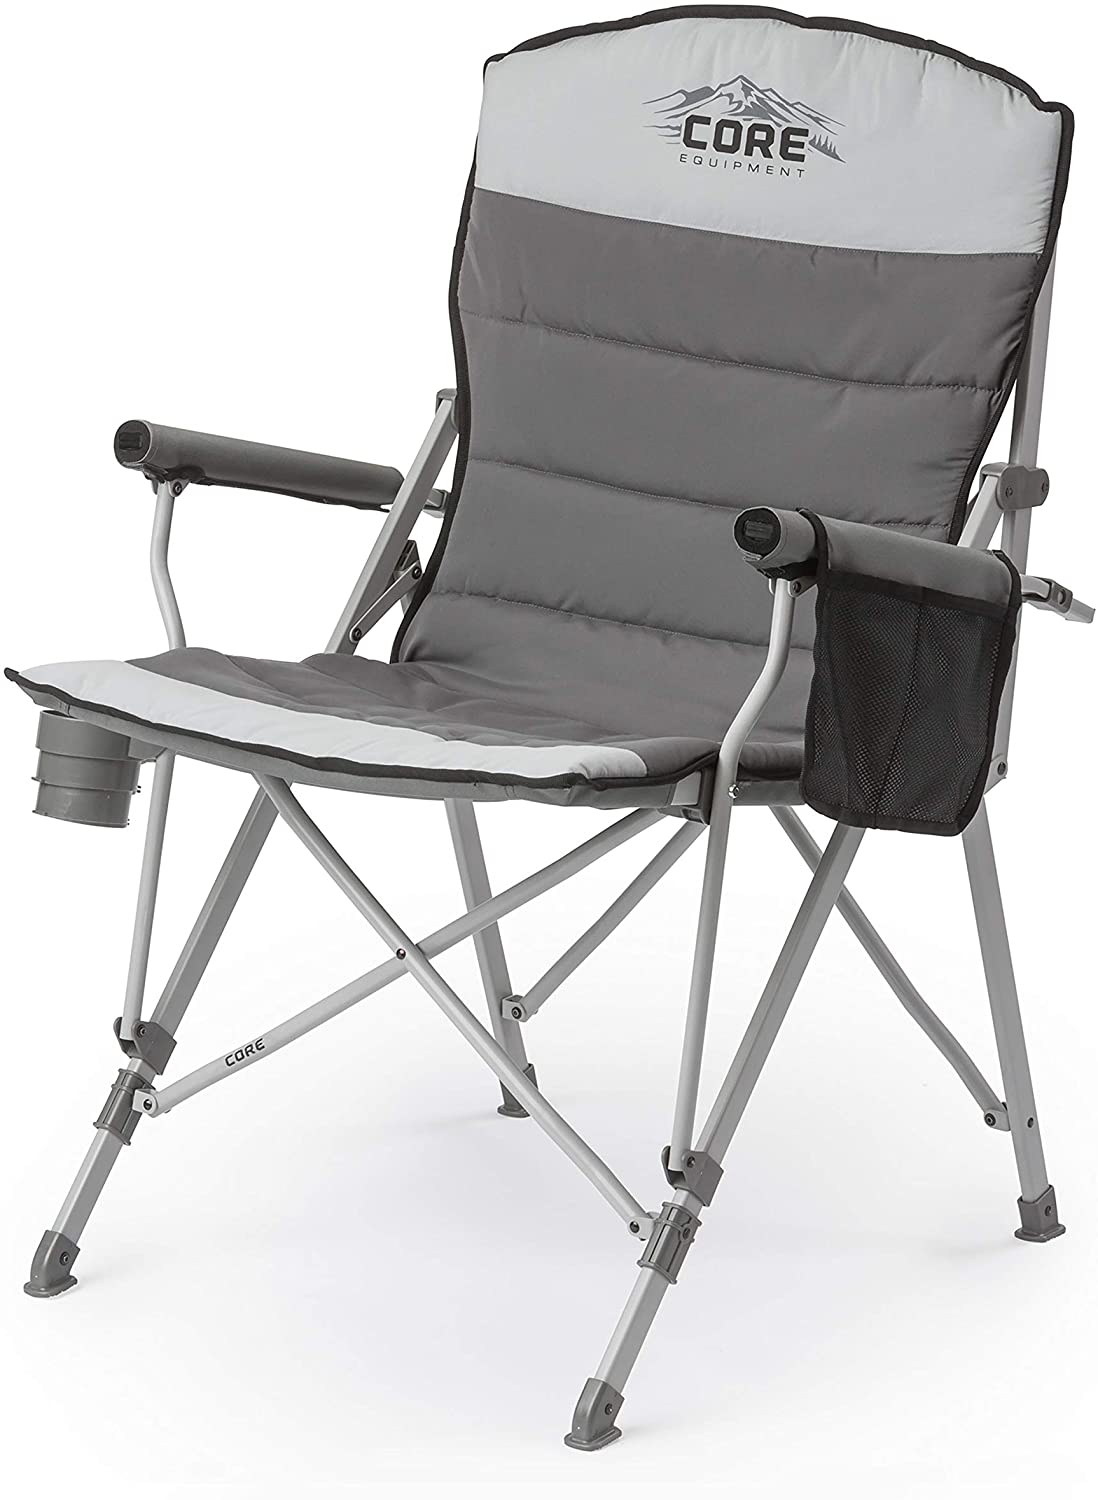 The 10 Best Outdoor Folding Chairs of 2020 for Camping